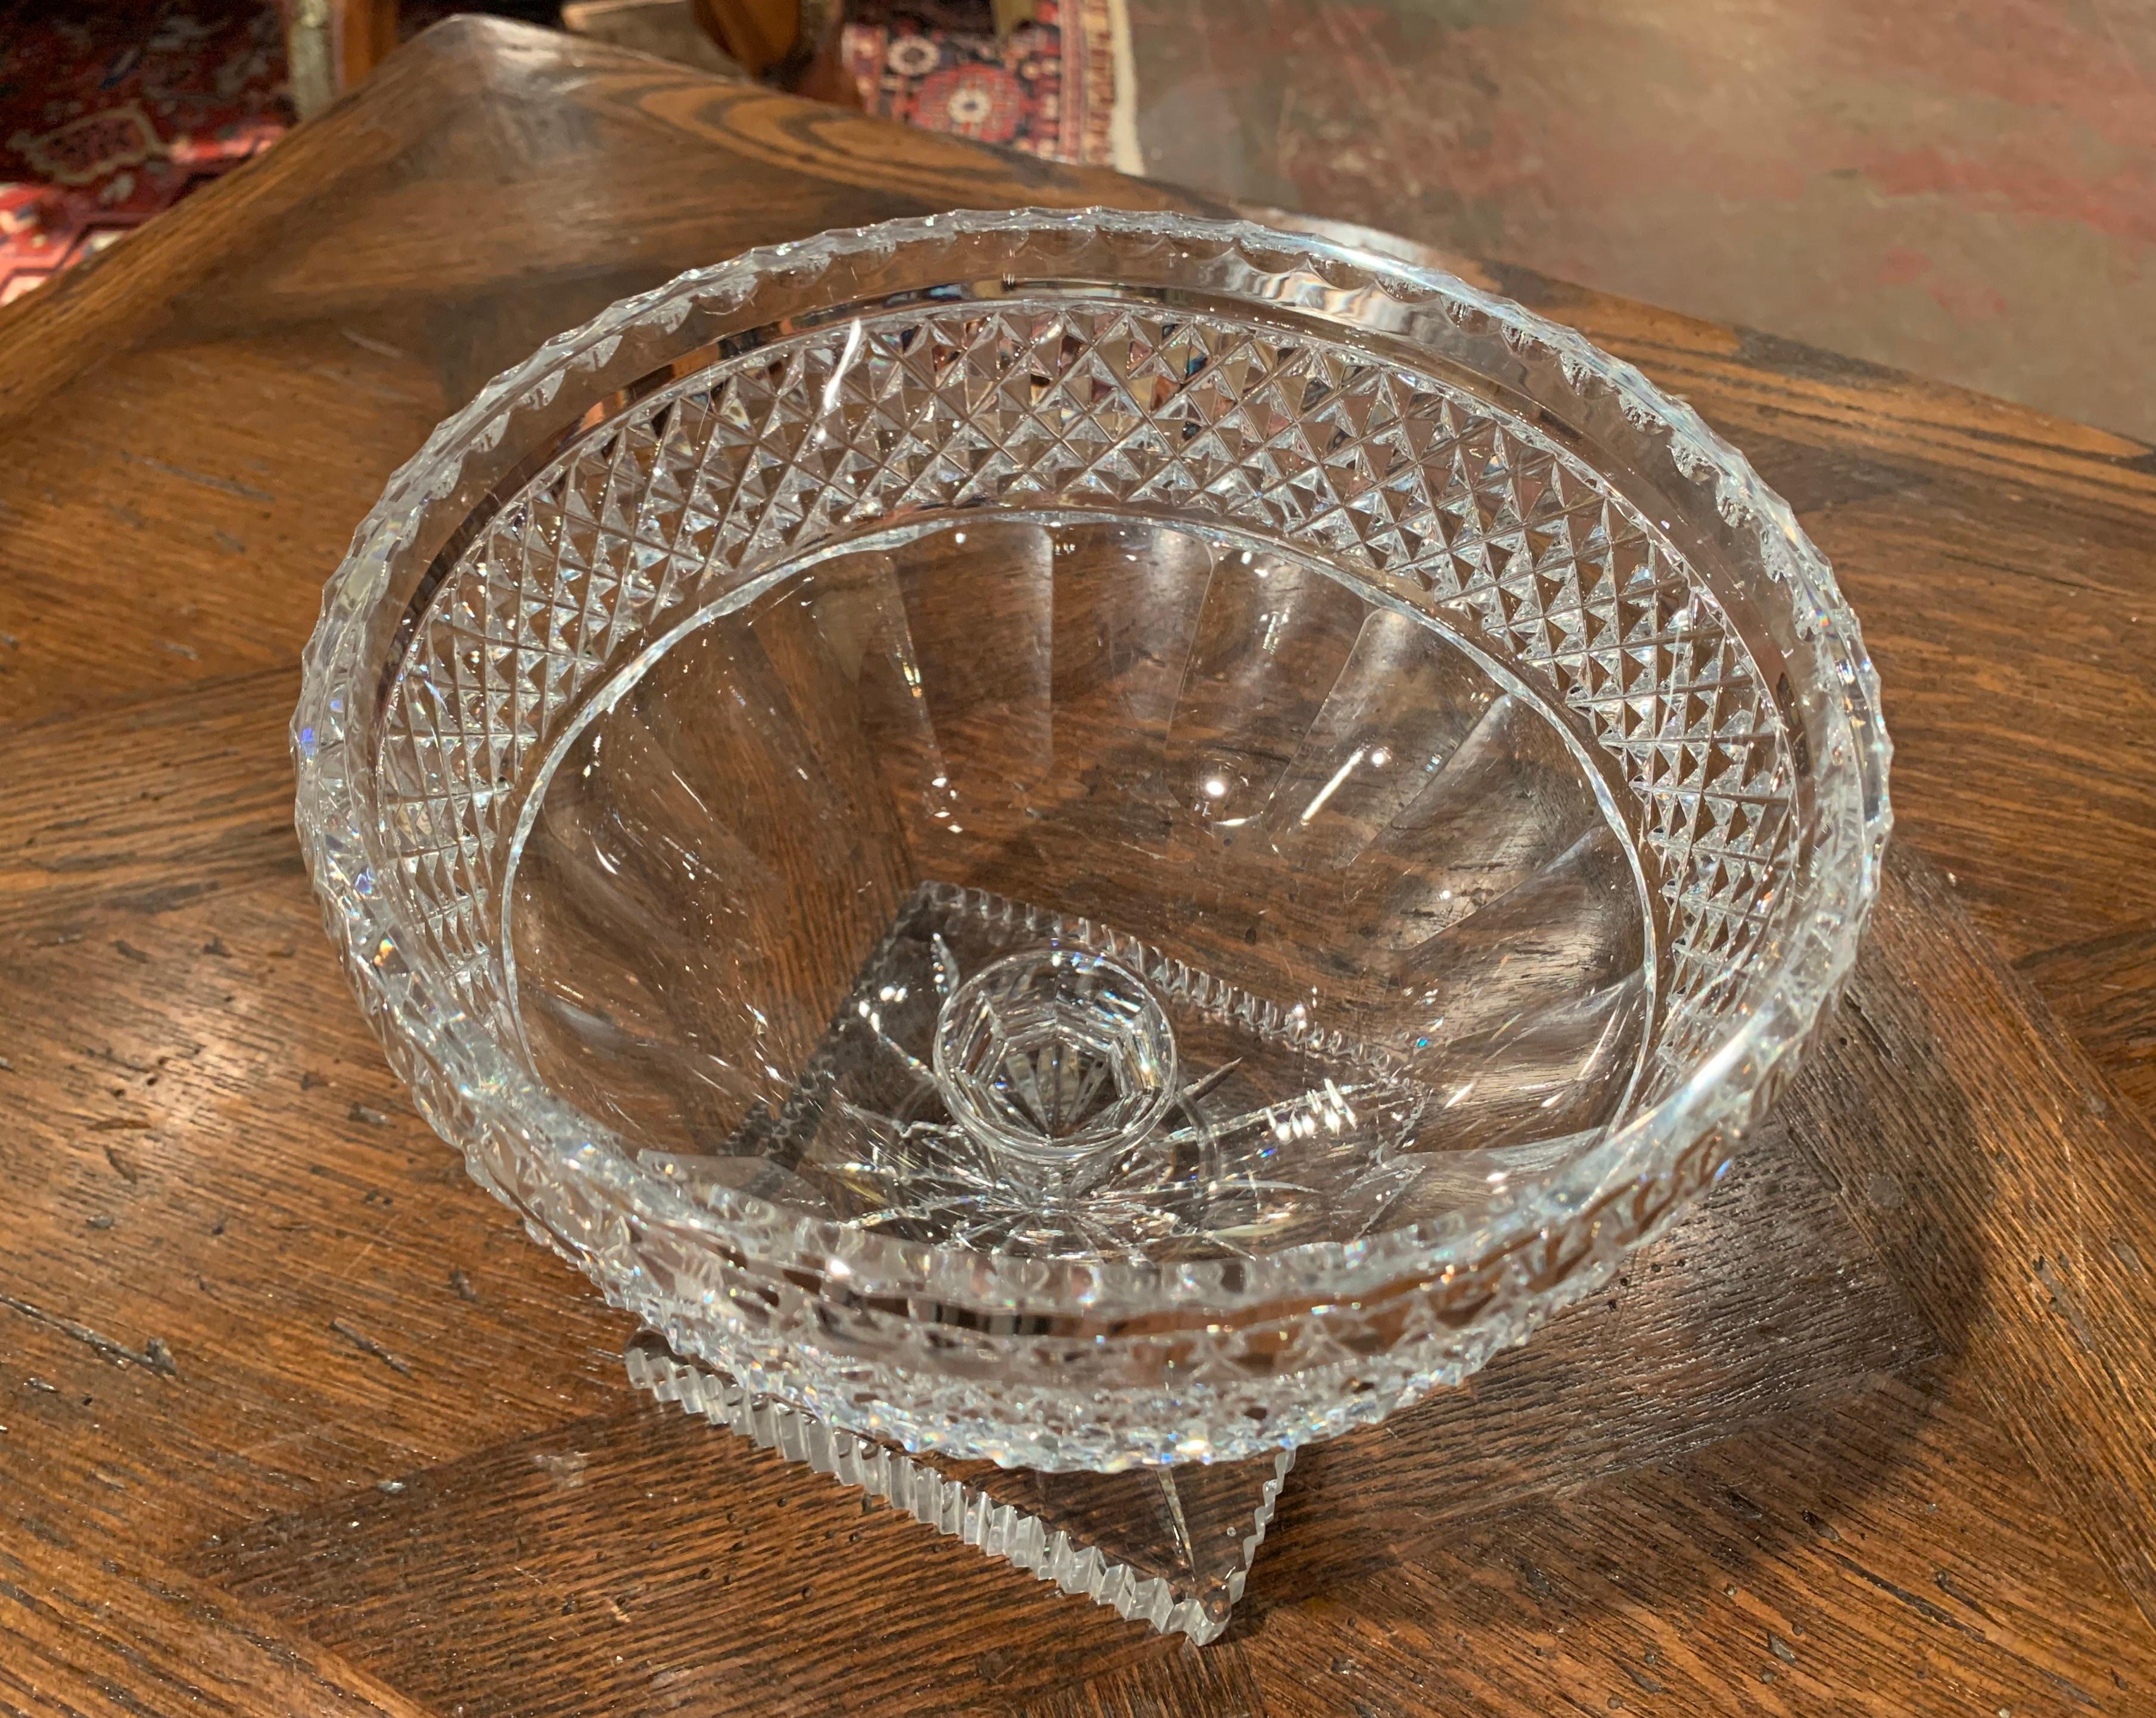 Midcentury French Cut Glass Crystal Decorative Compote Centerpiece Bowl 1